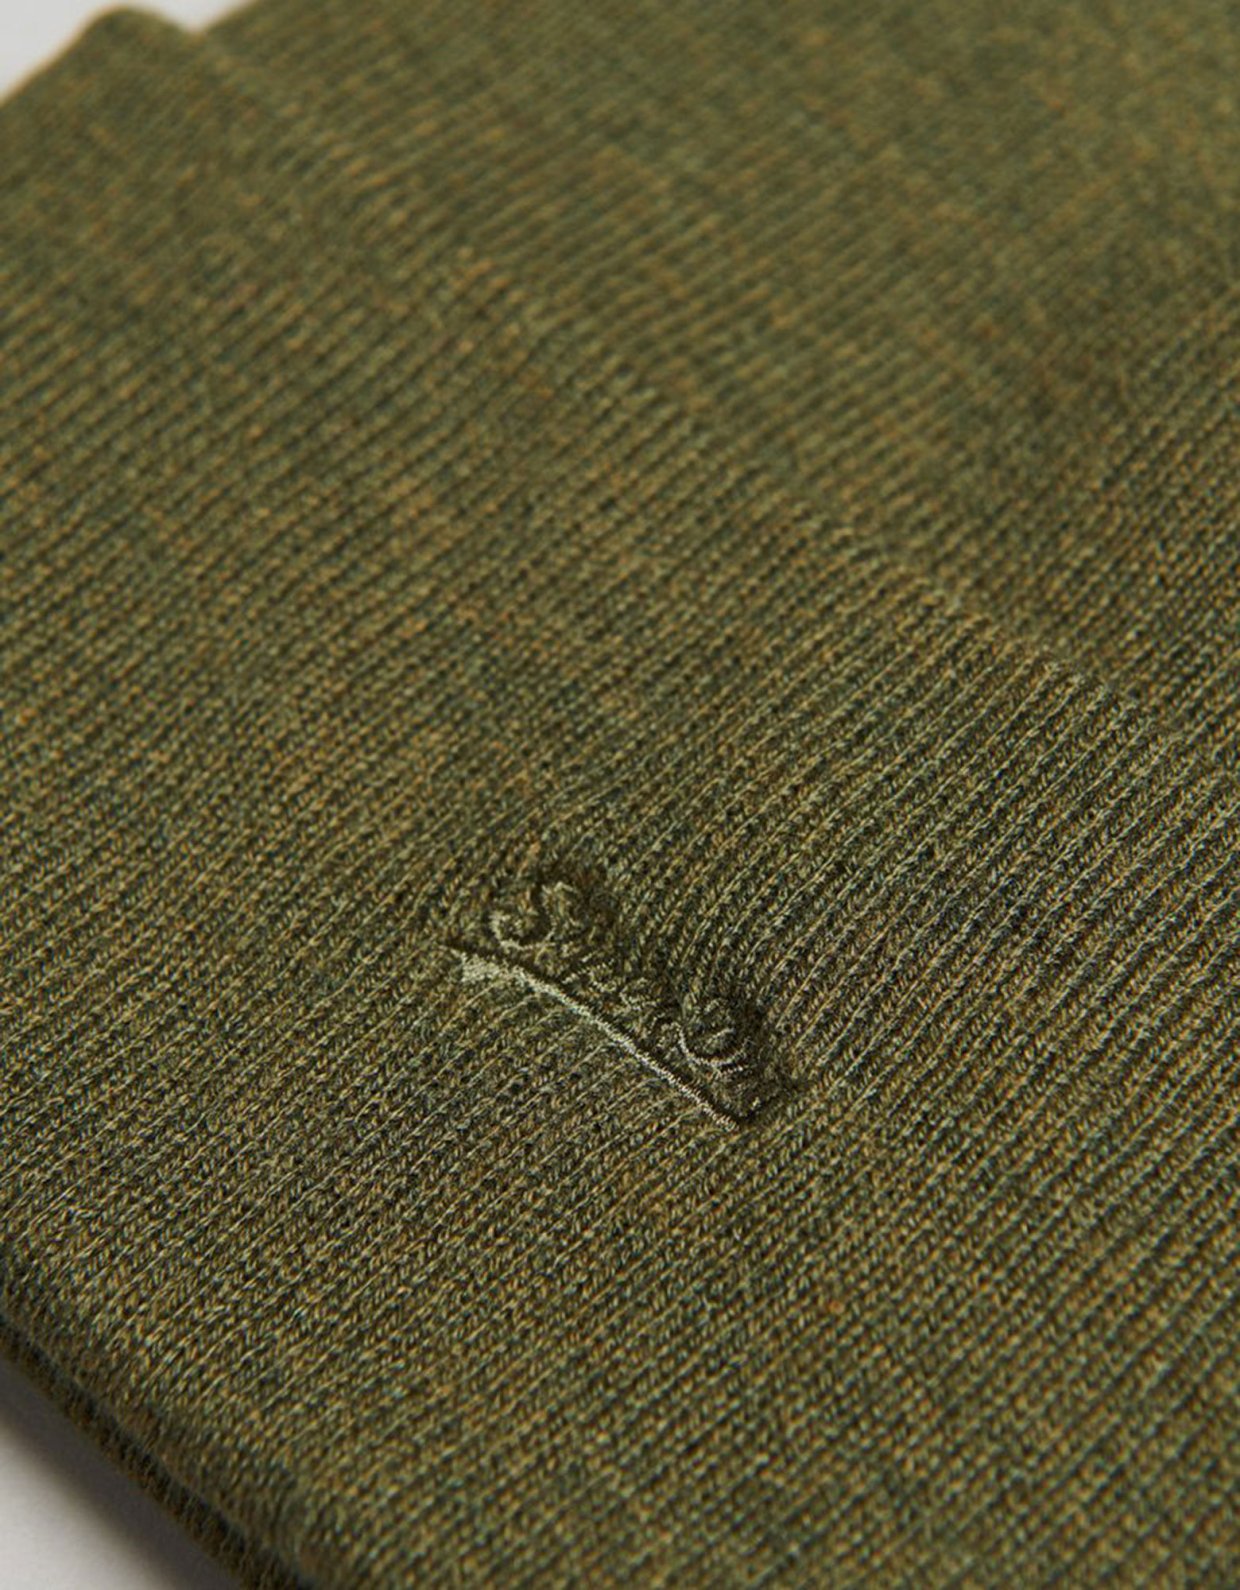 Superdry Vintage classic beanie olive